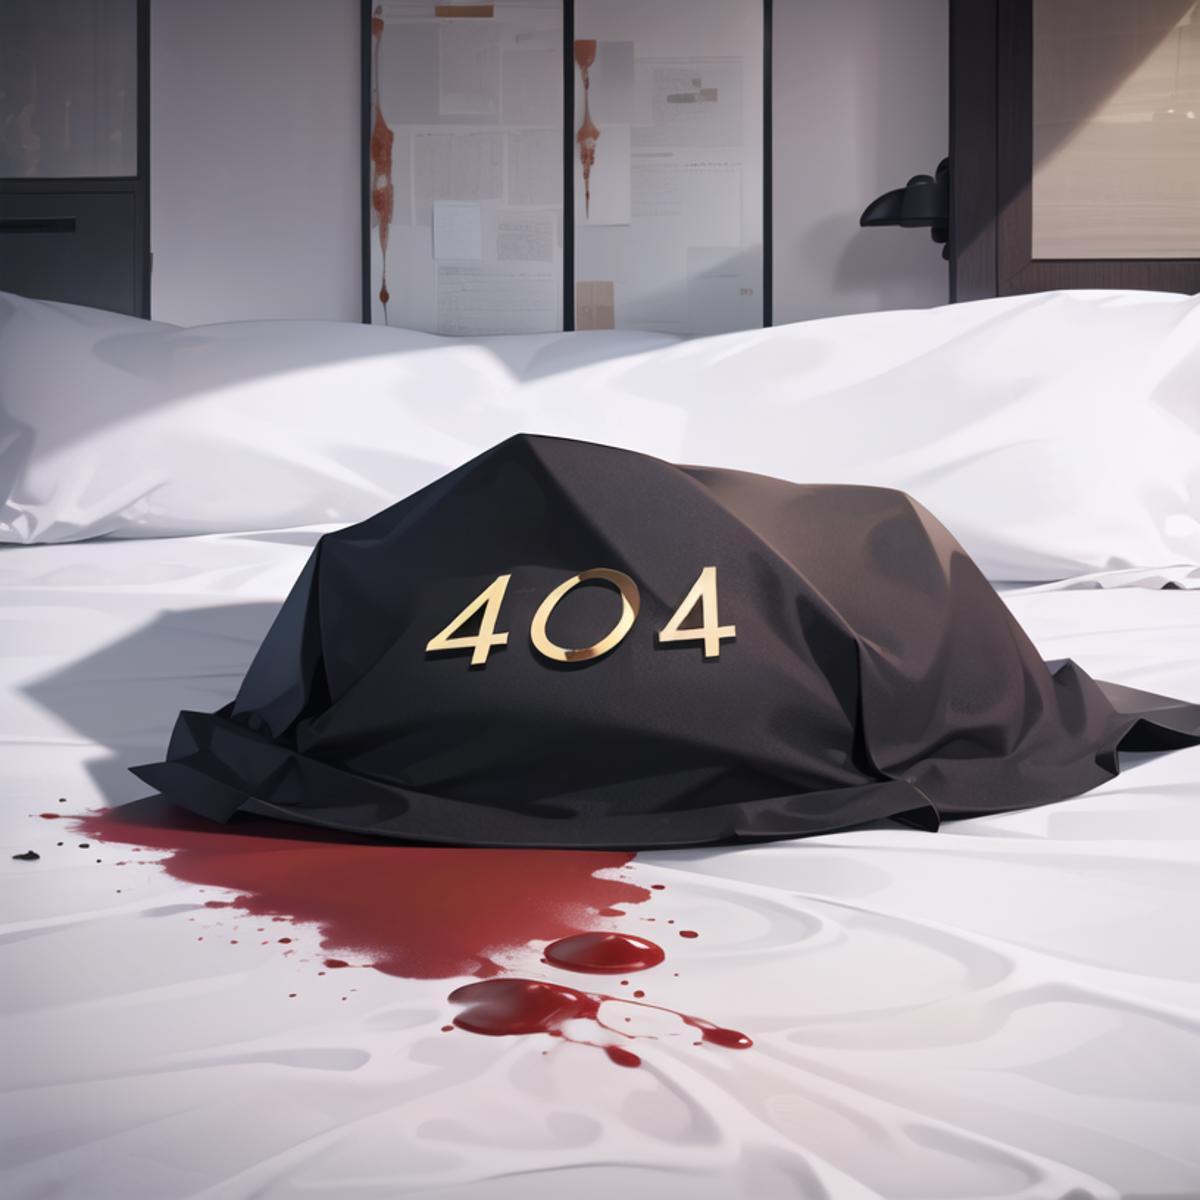 Blood on a bed with a 404 hat on top.